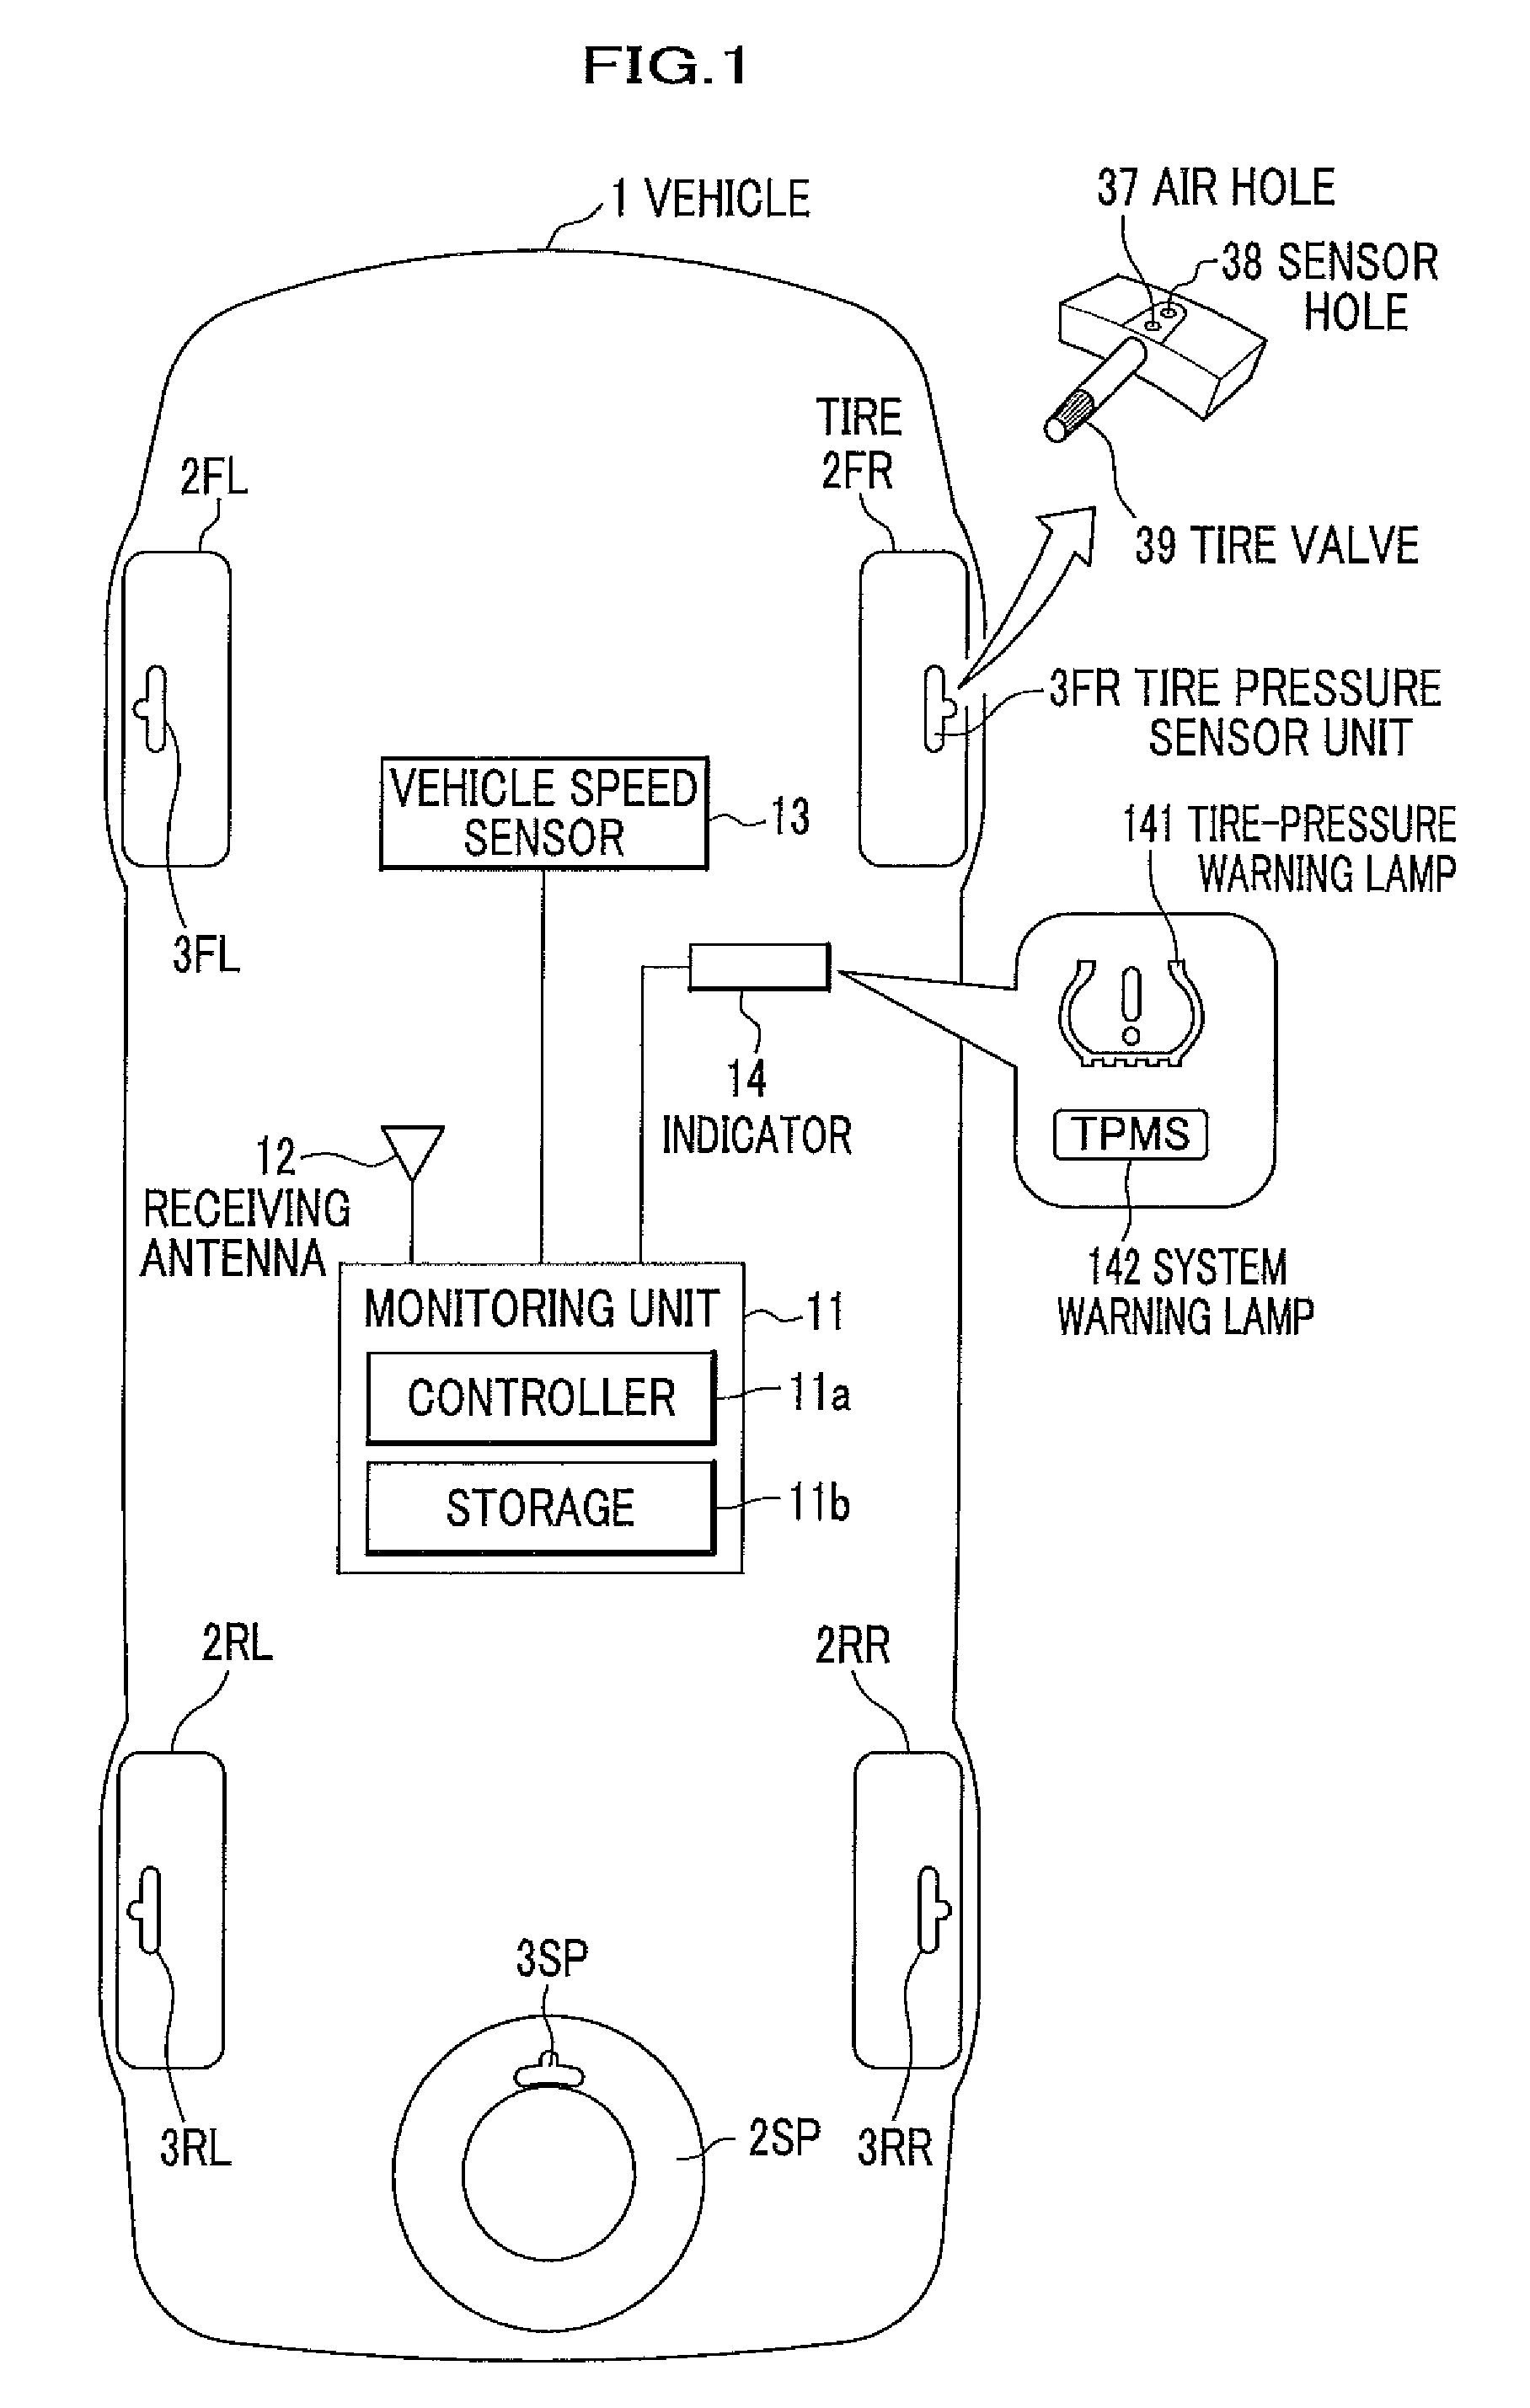 Tire pressure monitoring system and pressure monitoring unit